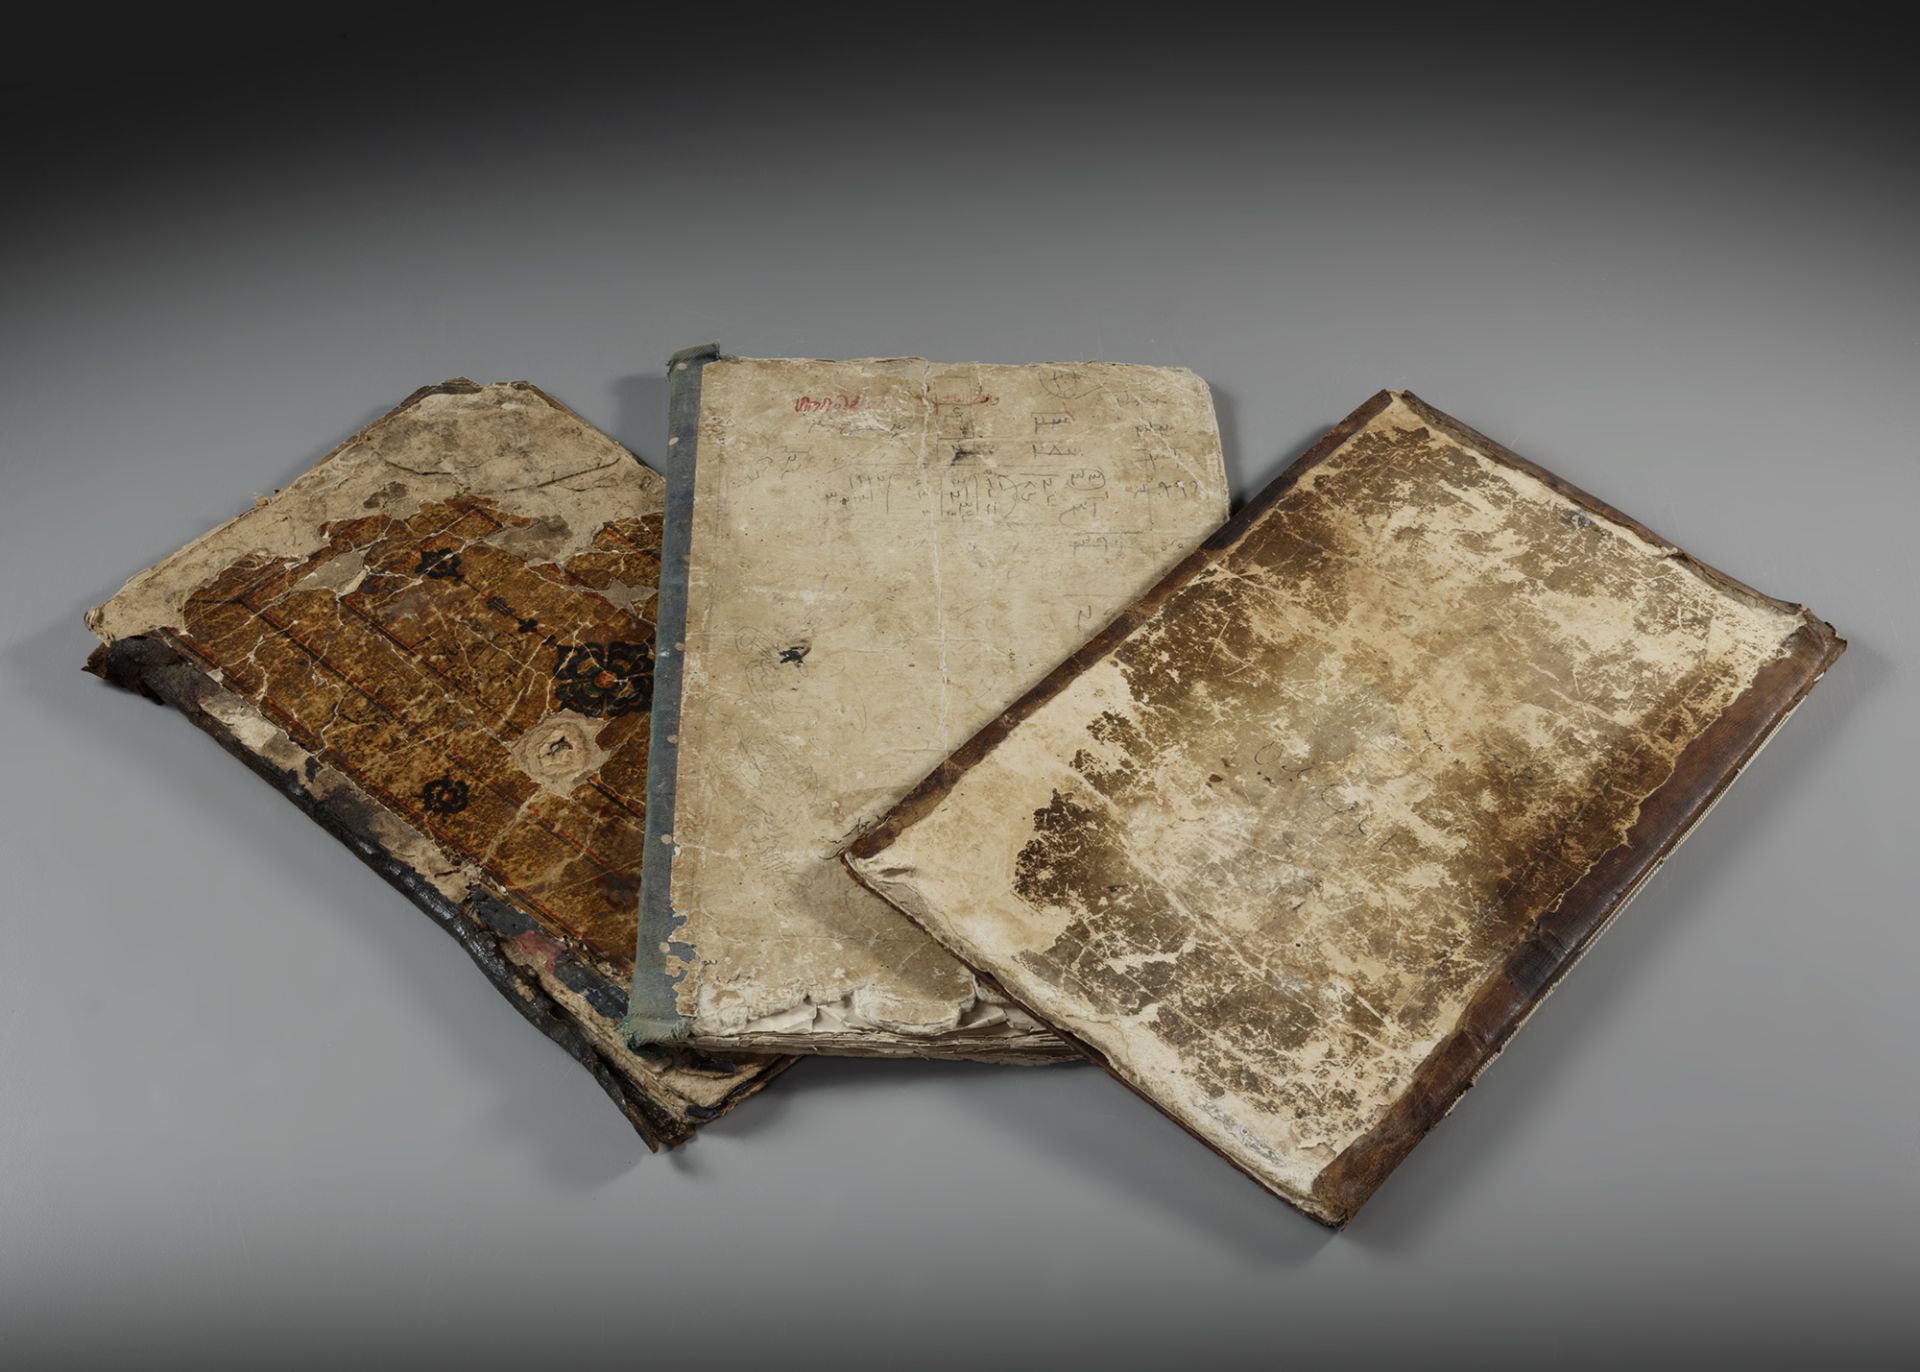 THREE QURAN SECTIONS, CENTRAL ASIA, LATE 19TH CENTURY - Image 7 of 8